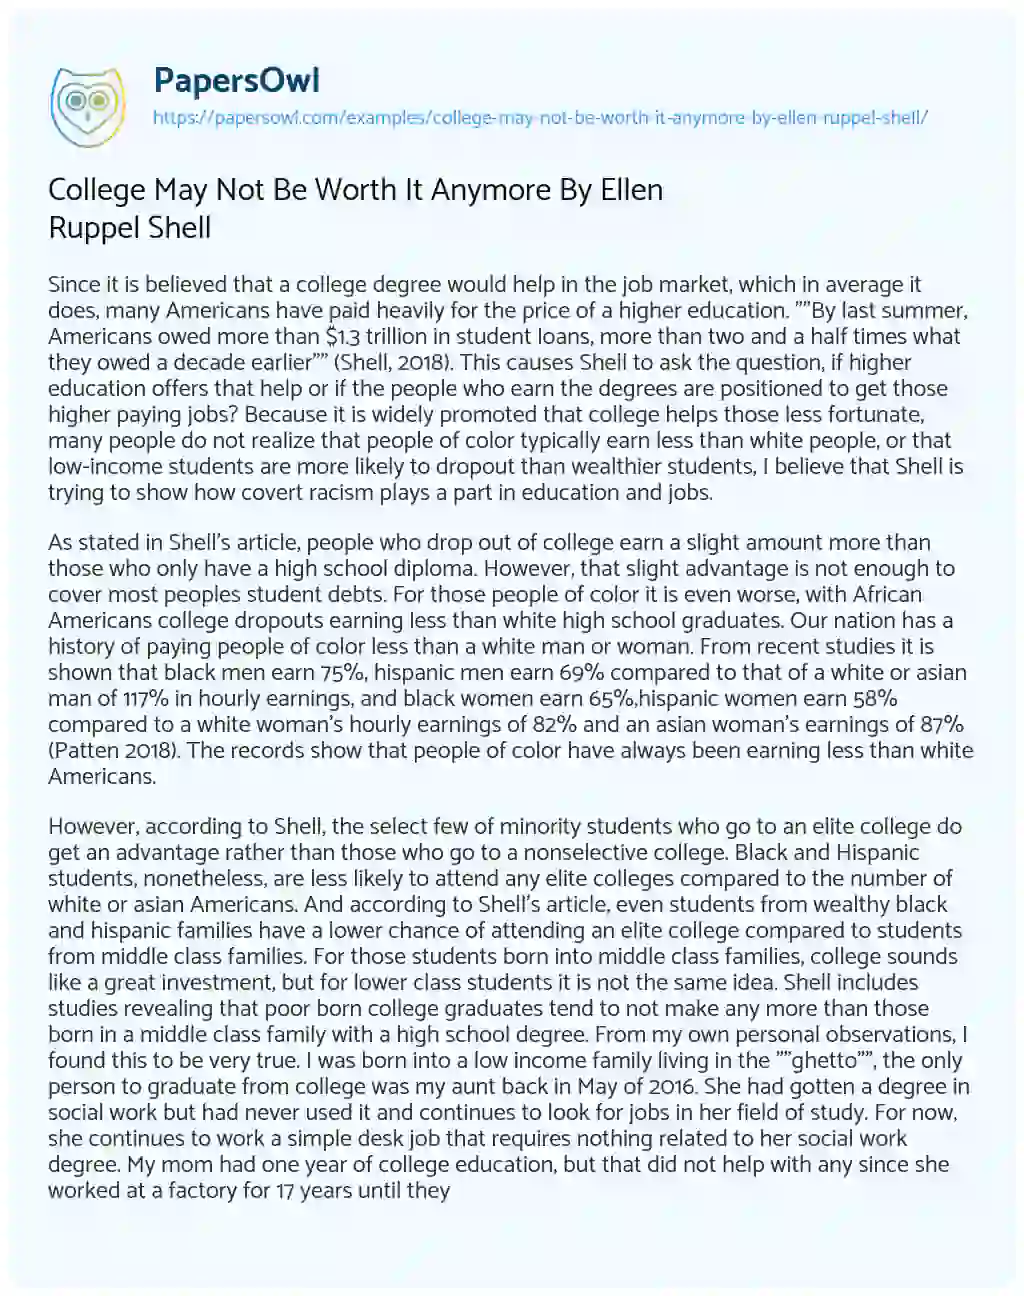 Essay on College May not be Worth it Anymore by Ellen Ruppel Shell